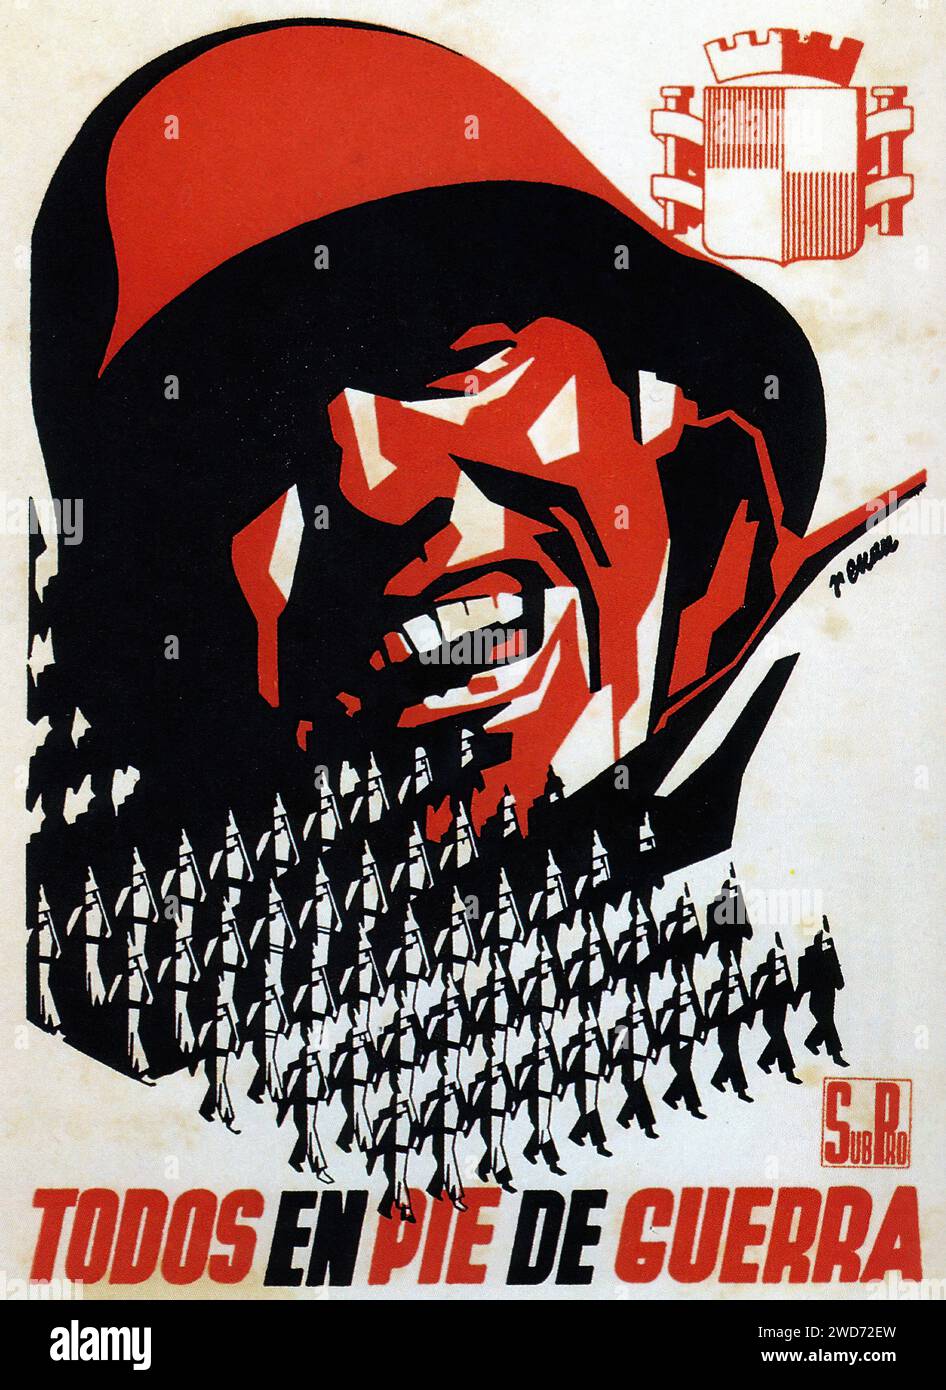 'All on the warpath, 1937.jpg' This poster, designed by Josep Renau, presents a militaristic theme with soldiers marching beneath a stylized face, overlaid with the emblem of the Spanish Republic. The use of stark red and black colors creates a dramatic effect - Spanish Civil War (Guerra Civil Española) Propaganda Poster Stock Photo